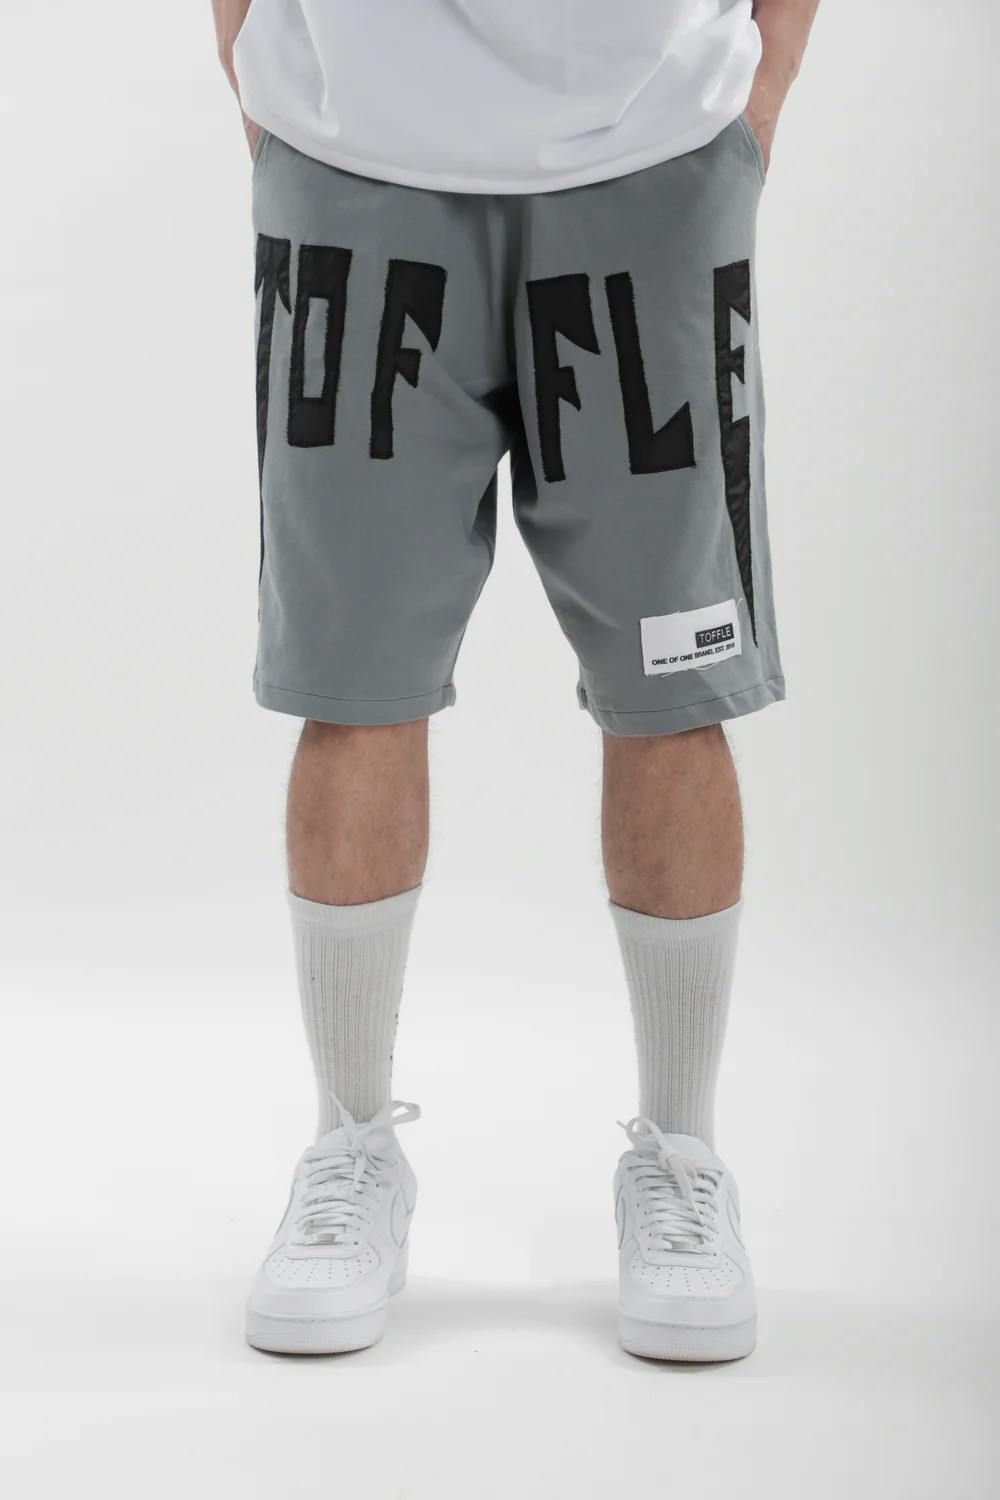 Toffle Signature Shorts, a product by TOFFLE